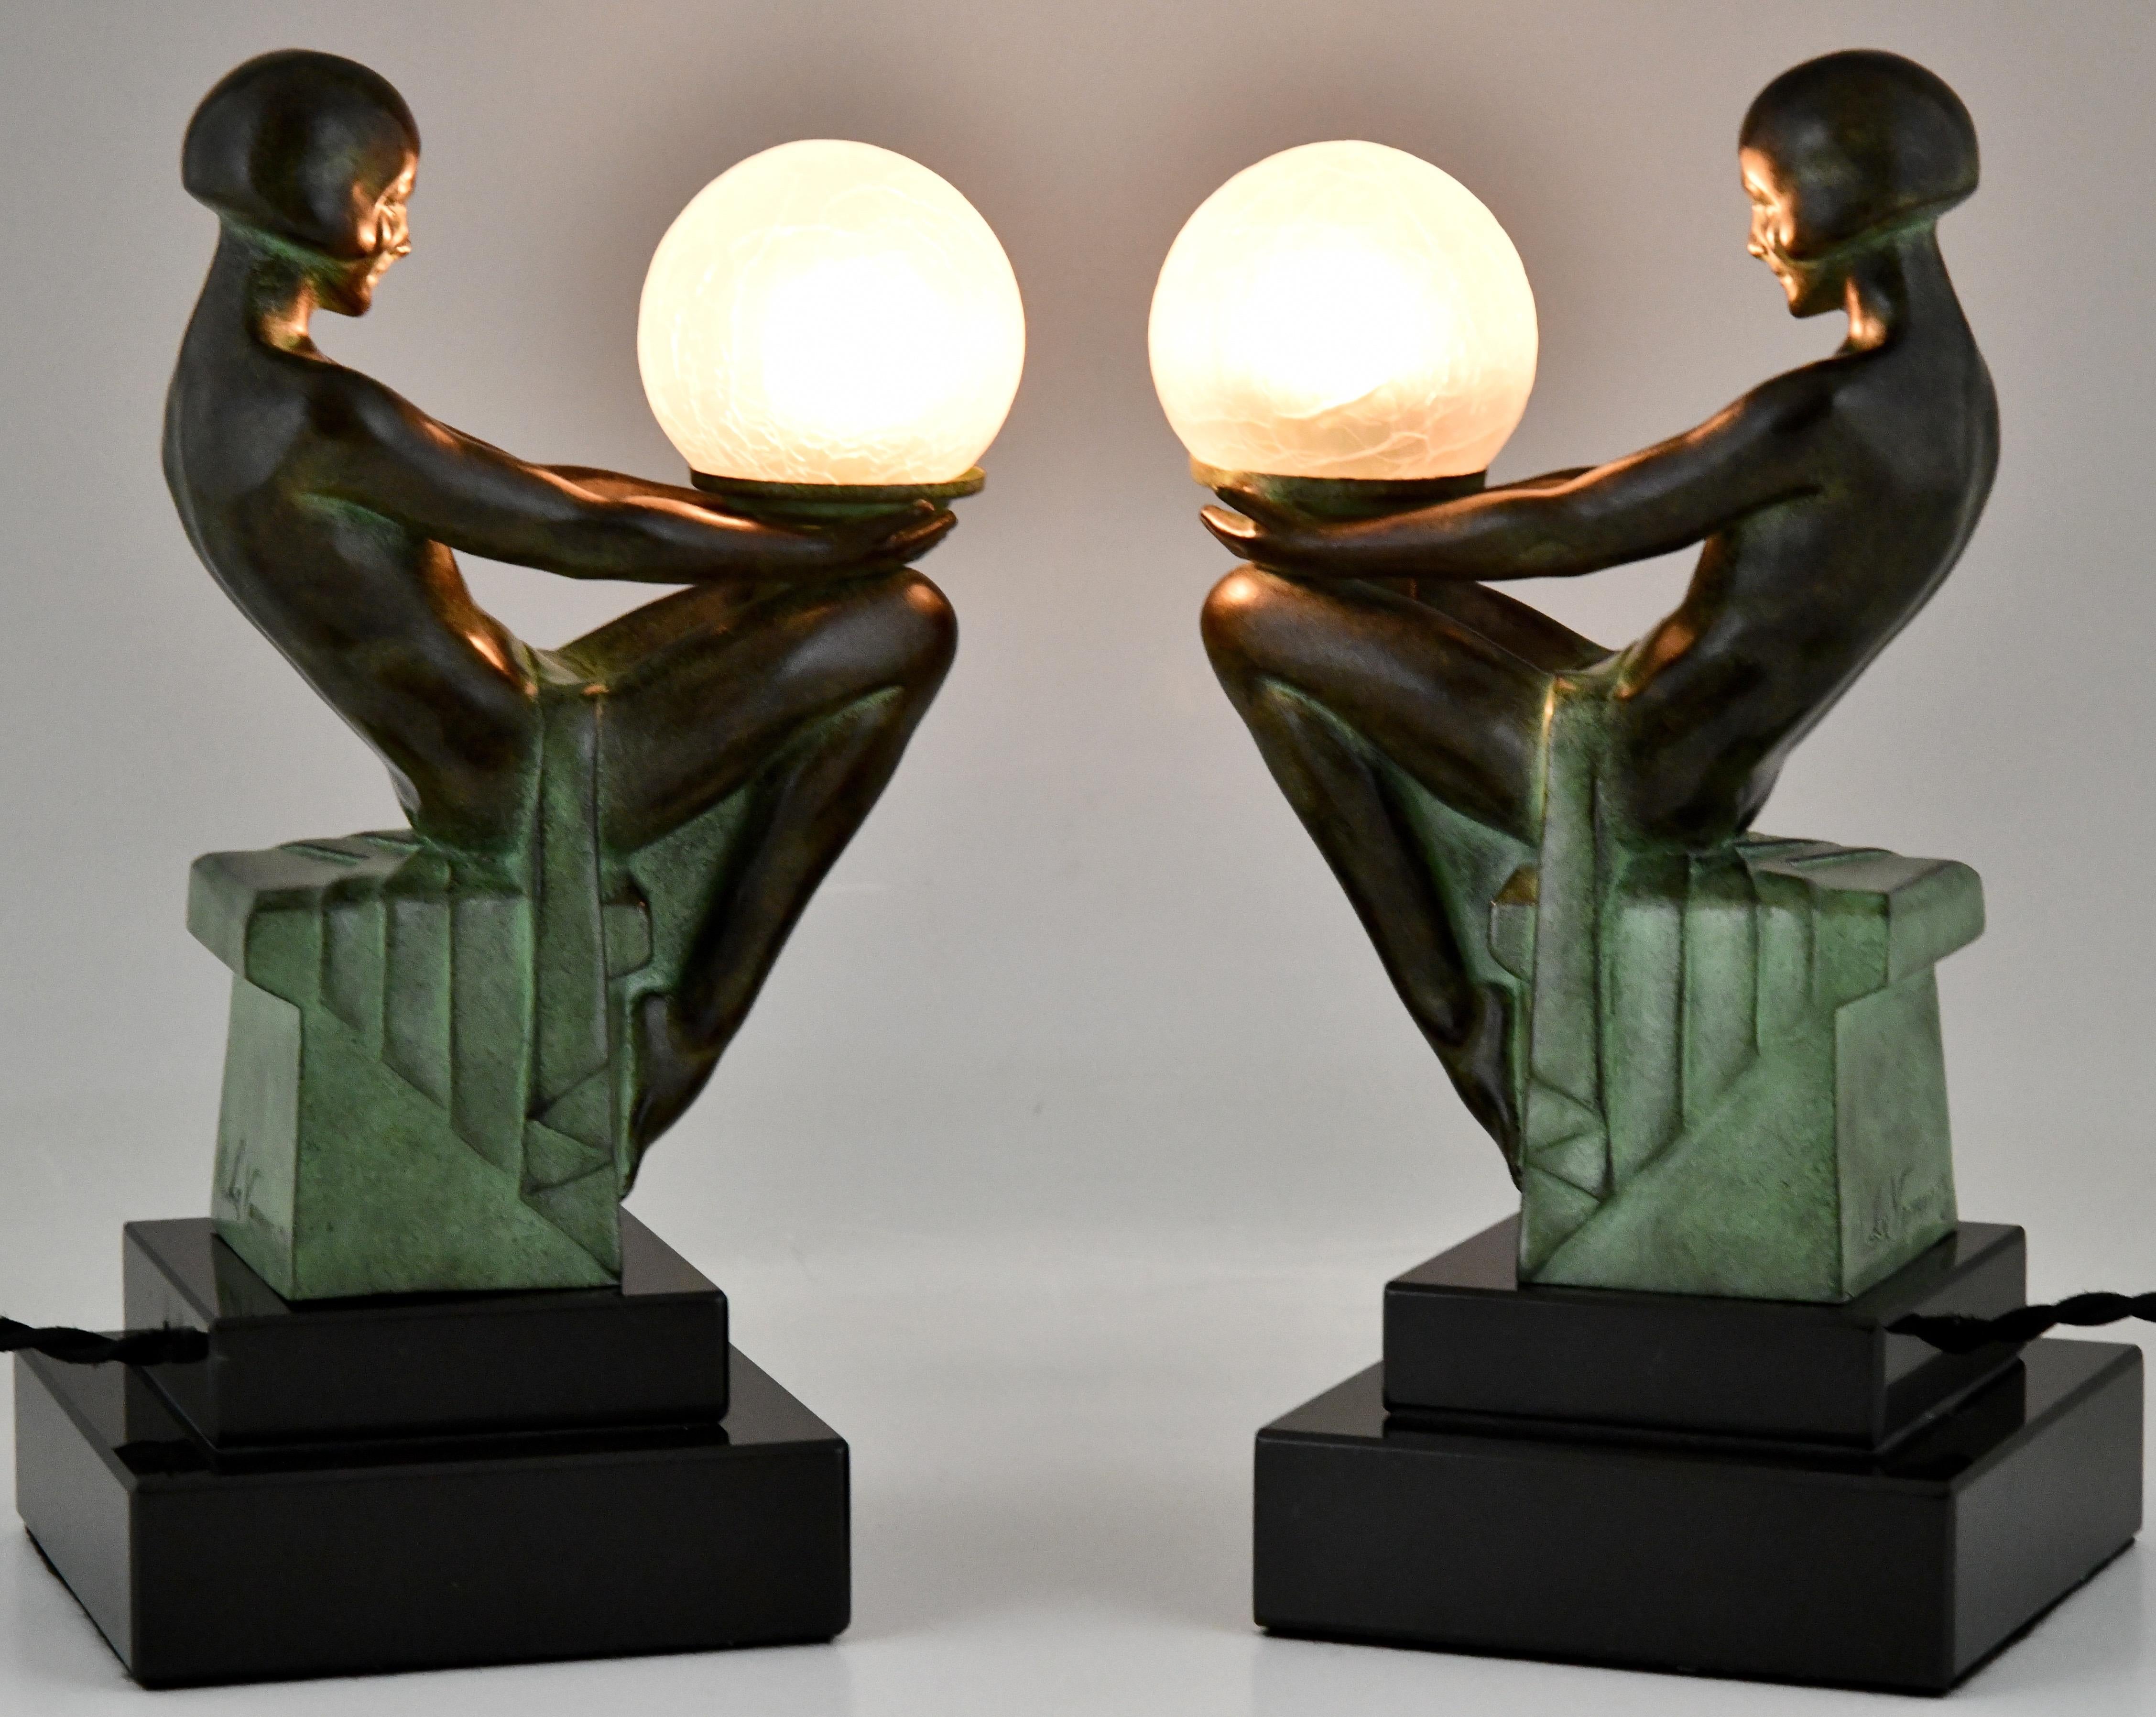 Pair of Art Deco Style Table Lamp with Seated Nudes by Max Le Verrier For  Sale at 1stDibs | art deco lamps, art decco lamp